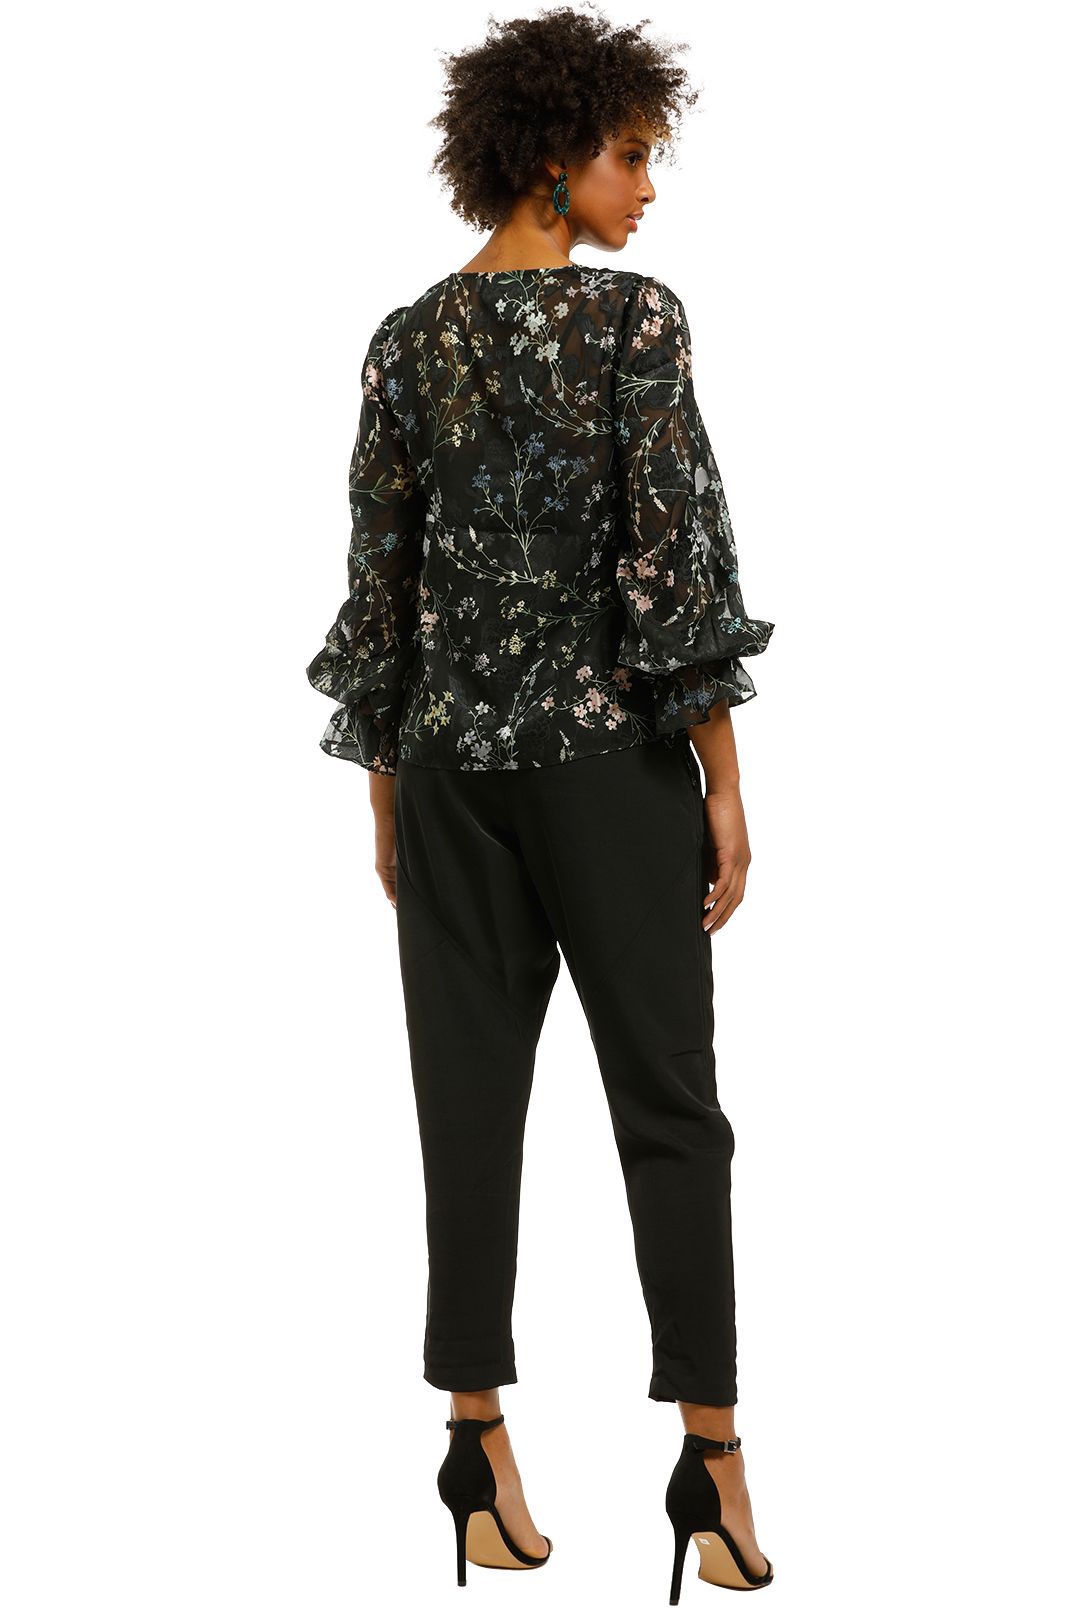 We-Are-Kindred-Ambrosia-Blouse-Black-Blooms-Back